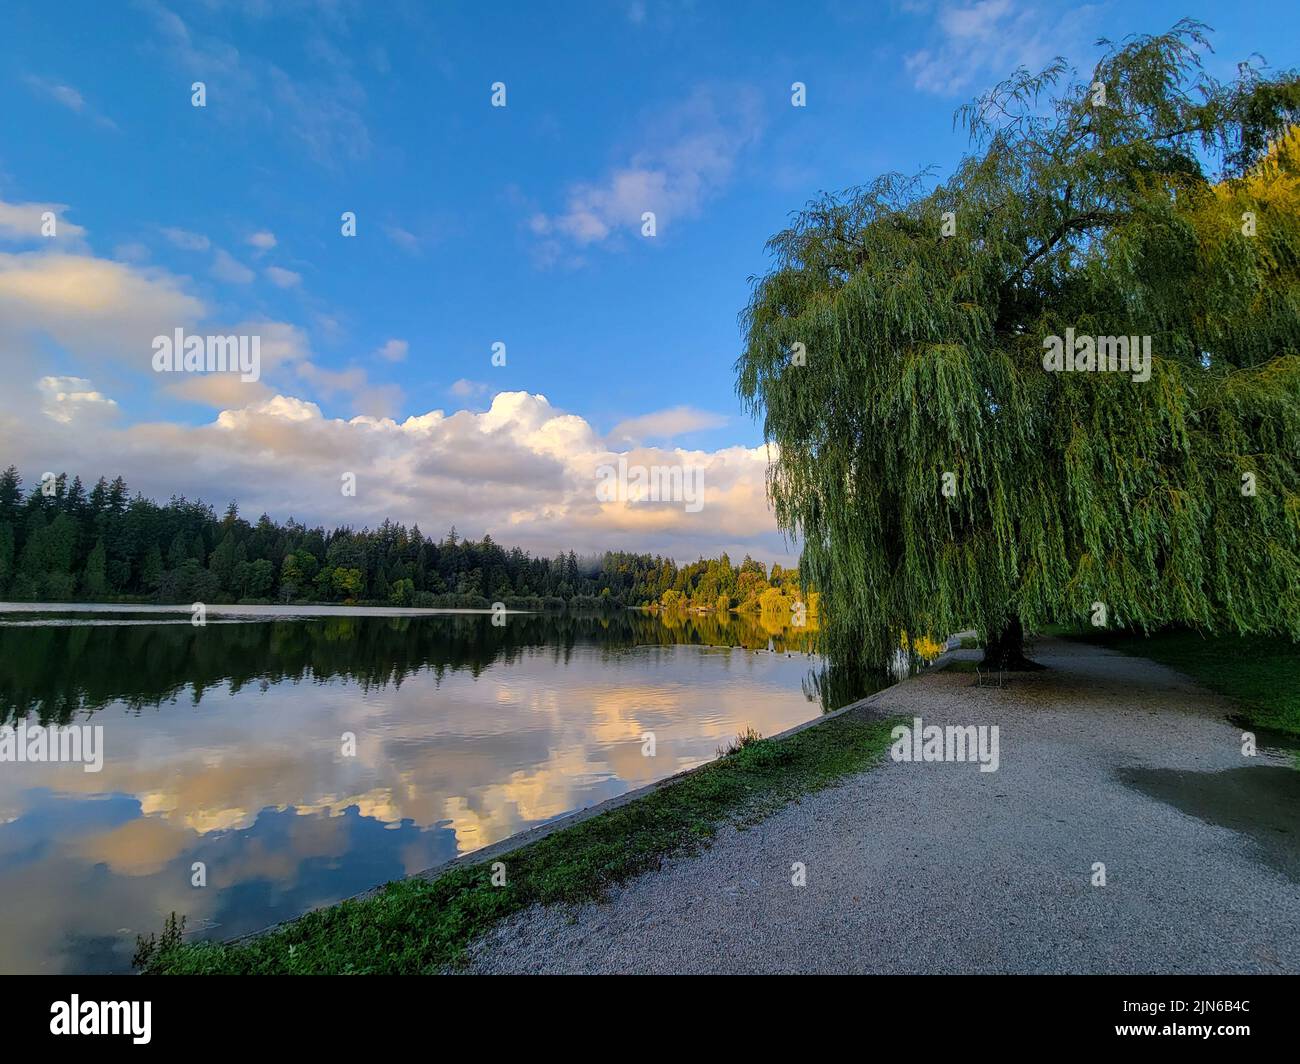 The beautiful view of the lake in a park surrounded by green vegetation. Lost Lagoon, Vancouver, BC. Stock Photo